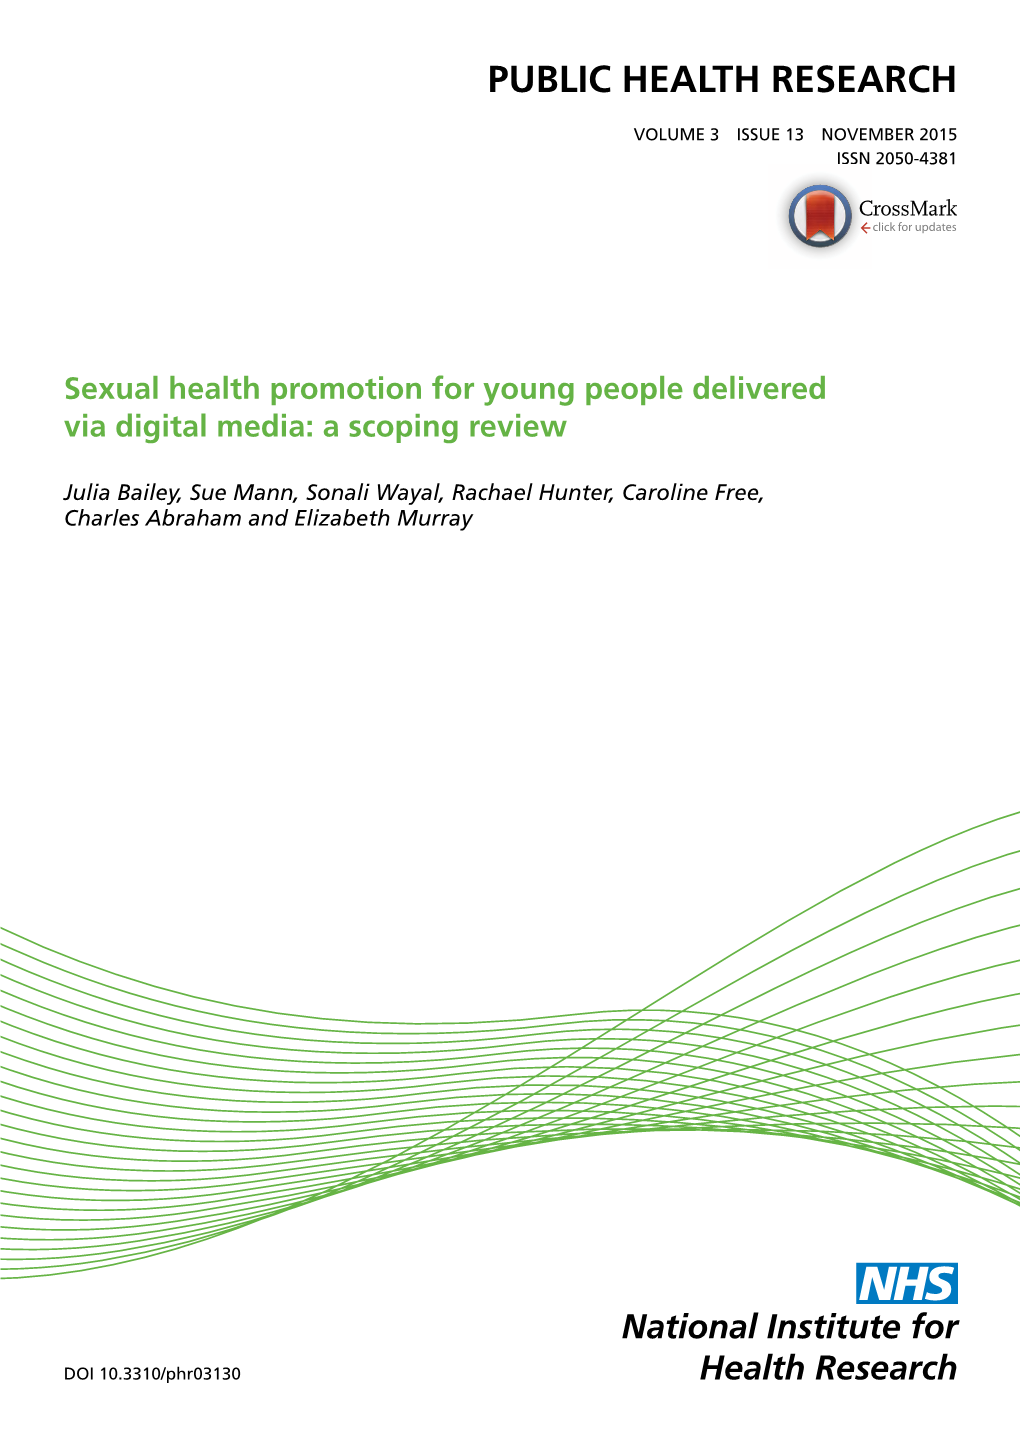 Sexual Health Promotion for Young People Delivered Via Digital Media: a Scoping Review